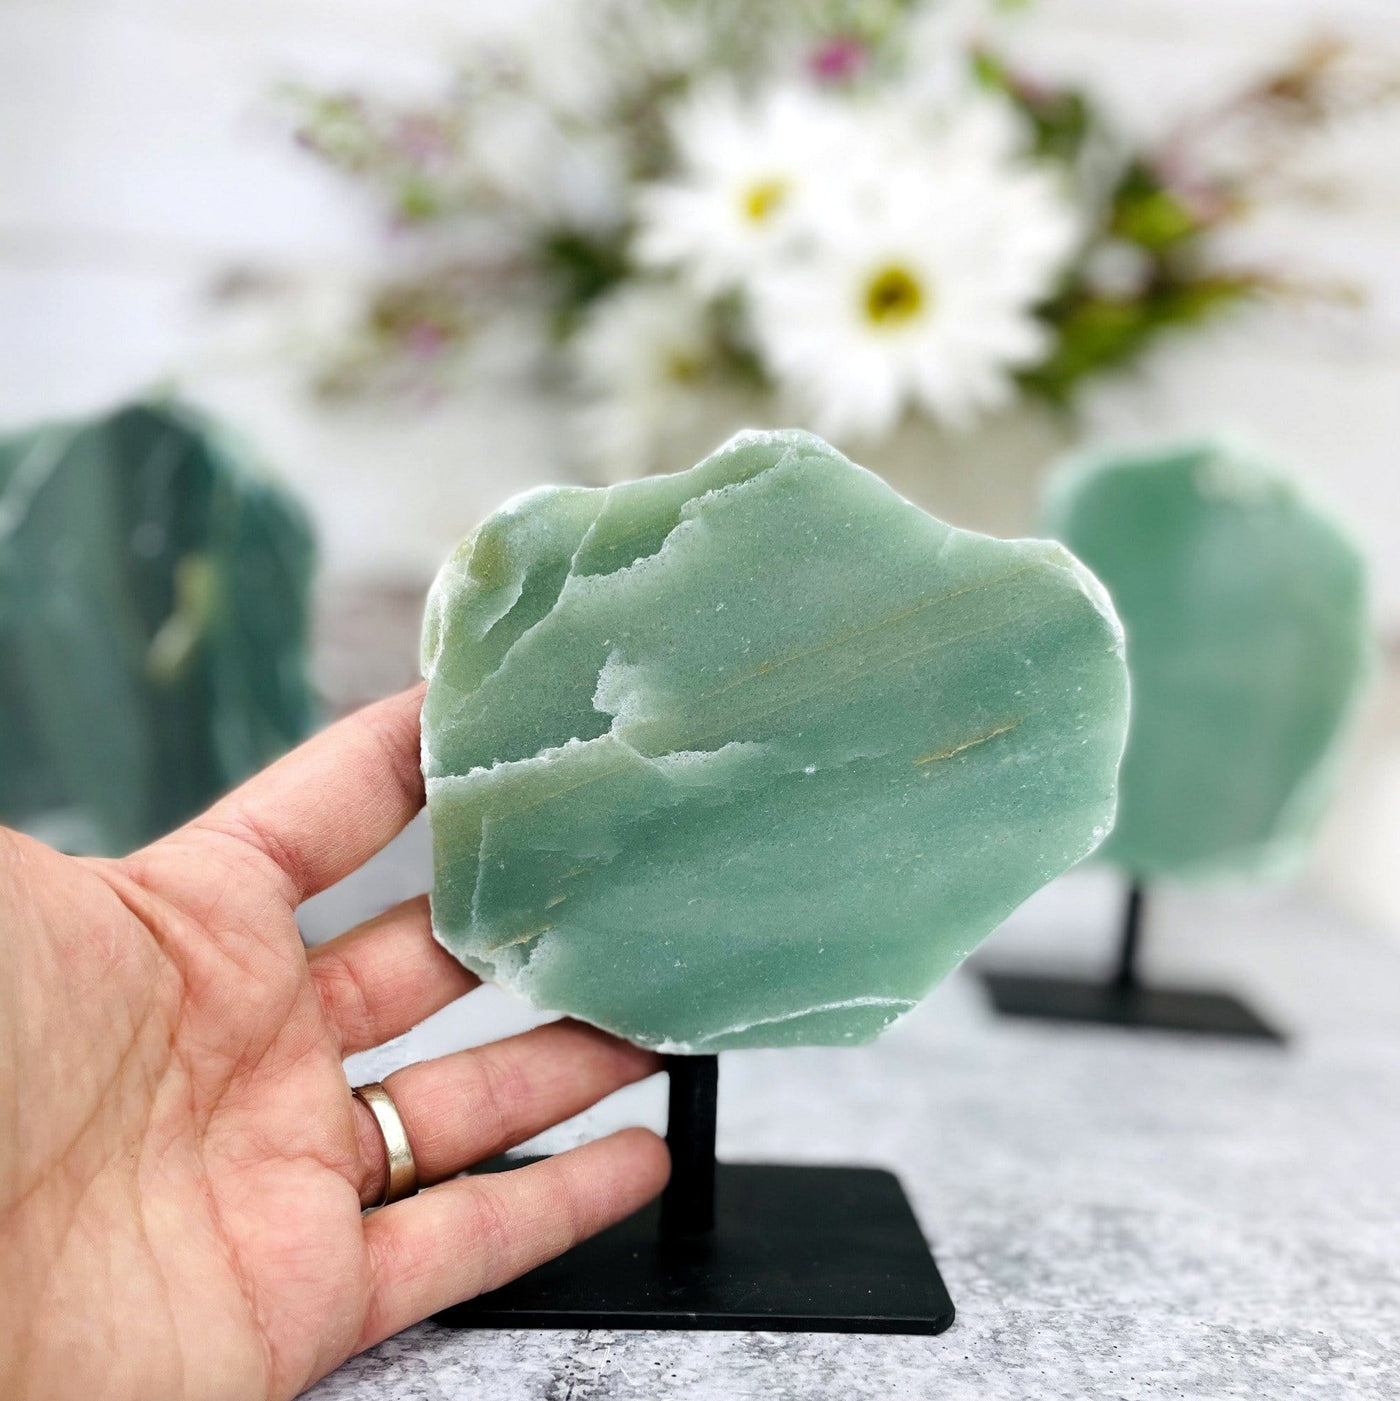 hand holding up polished green quartz on metal stand with 2 others blurred in the background